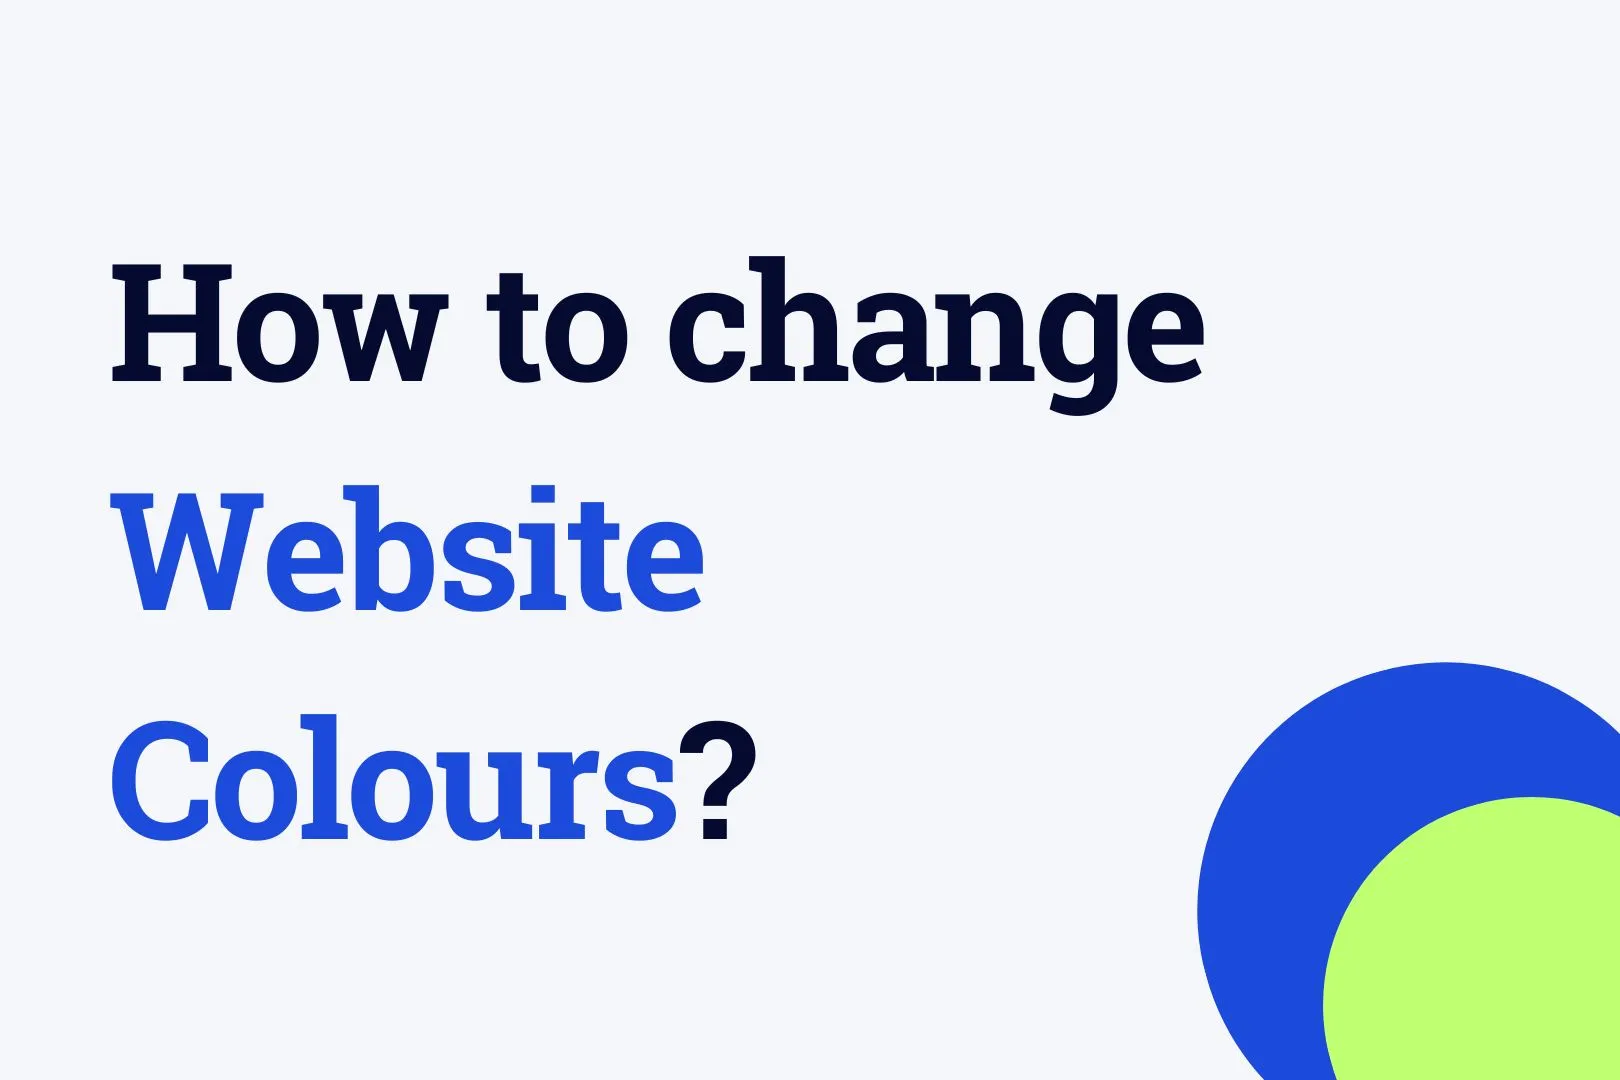 How to change website colours?